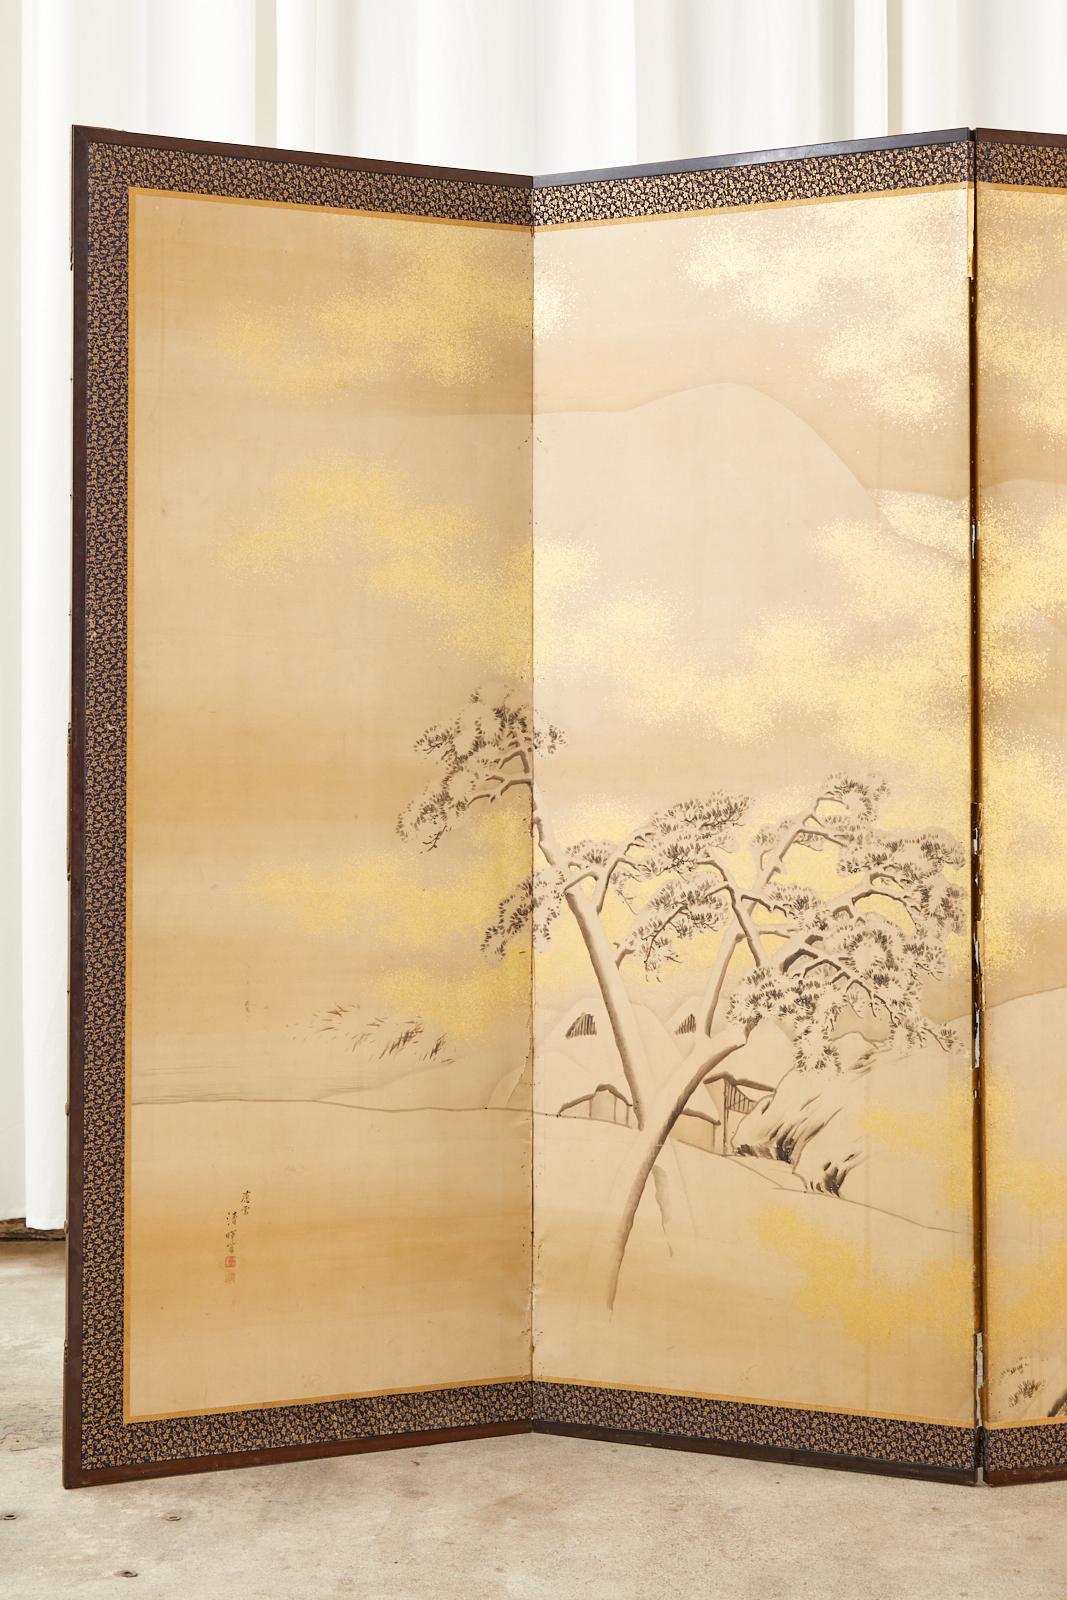 Fantastic early 19th century Japanese Edo period six-panel byobu screen by Yokoyama Seiki (Japanese 1793-1865). This commissioned screen (Oju) made in the Shijo school depicting trees in an idyllic snowy winter landscape. Ink and gold leaf flecks on